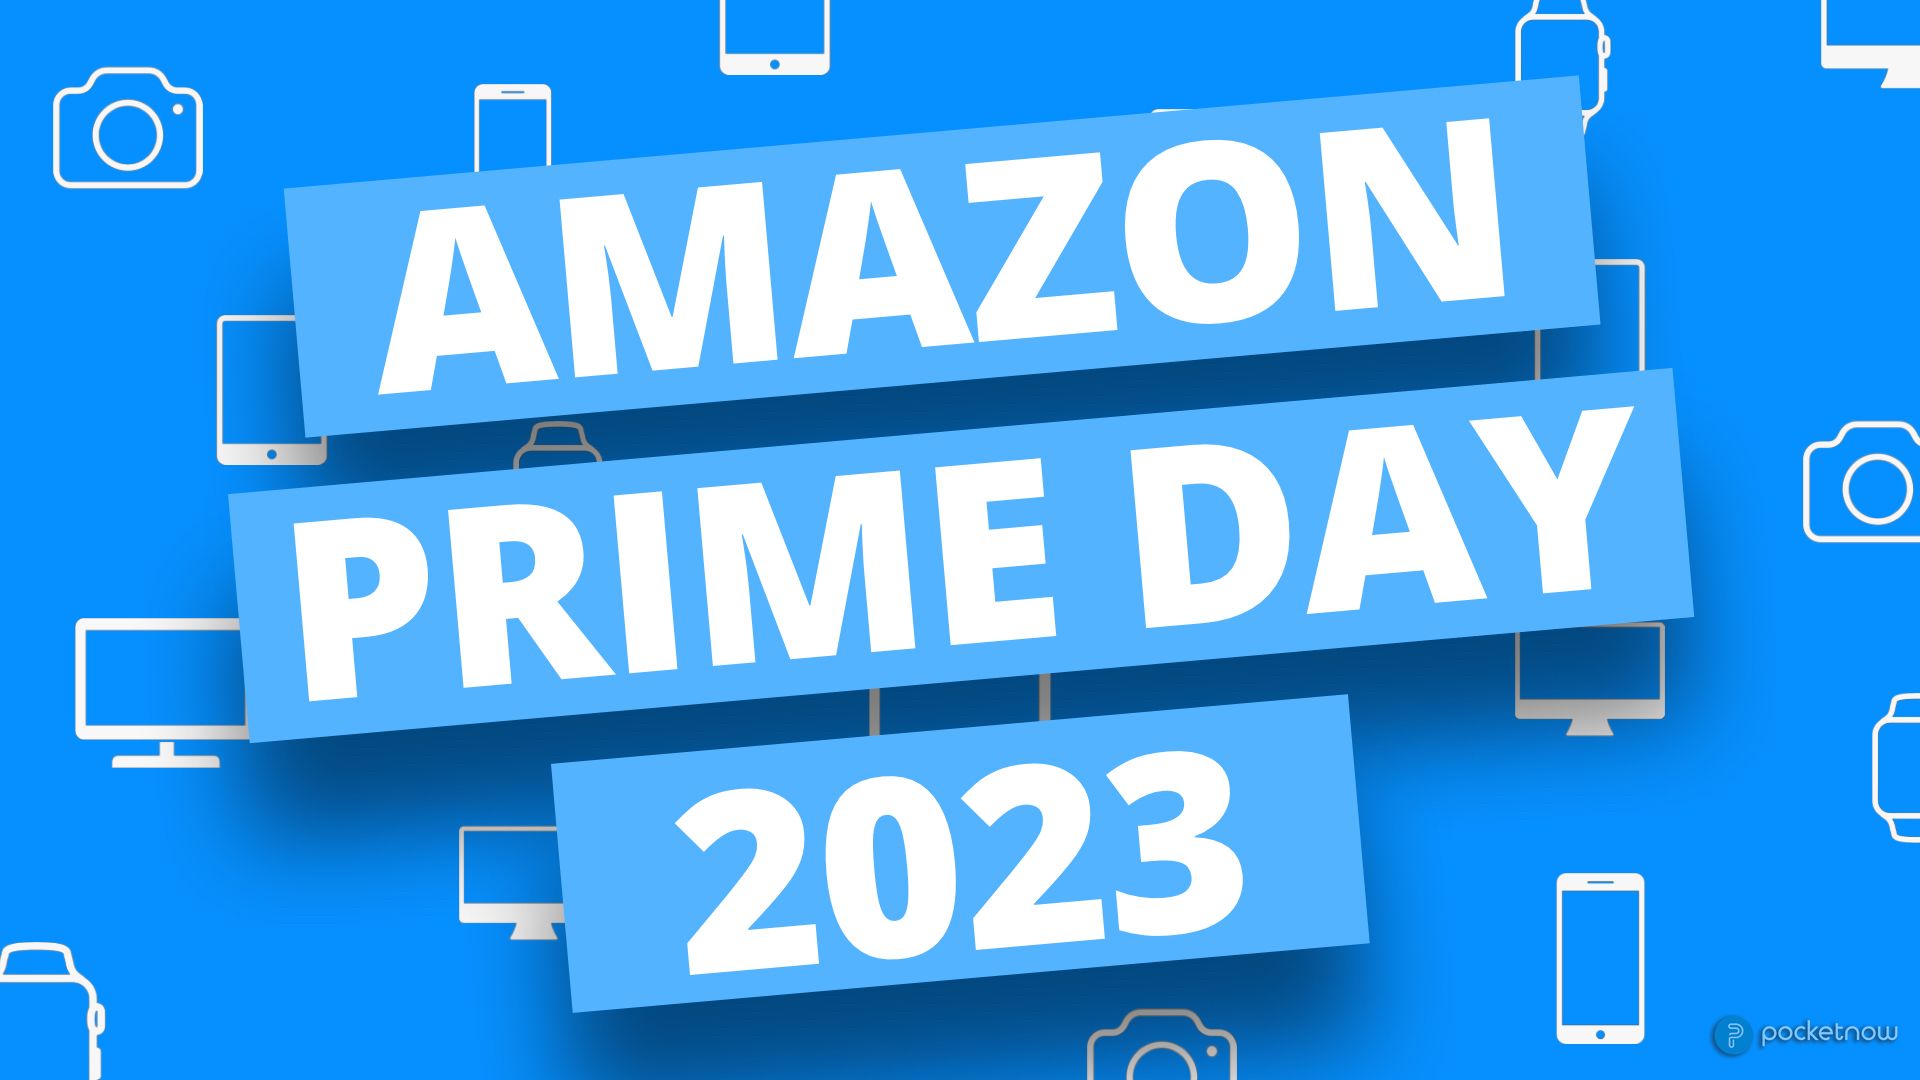 Amazon Prime Day 2023 Dates, tips, best early deals, and more